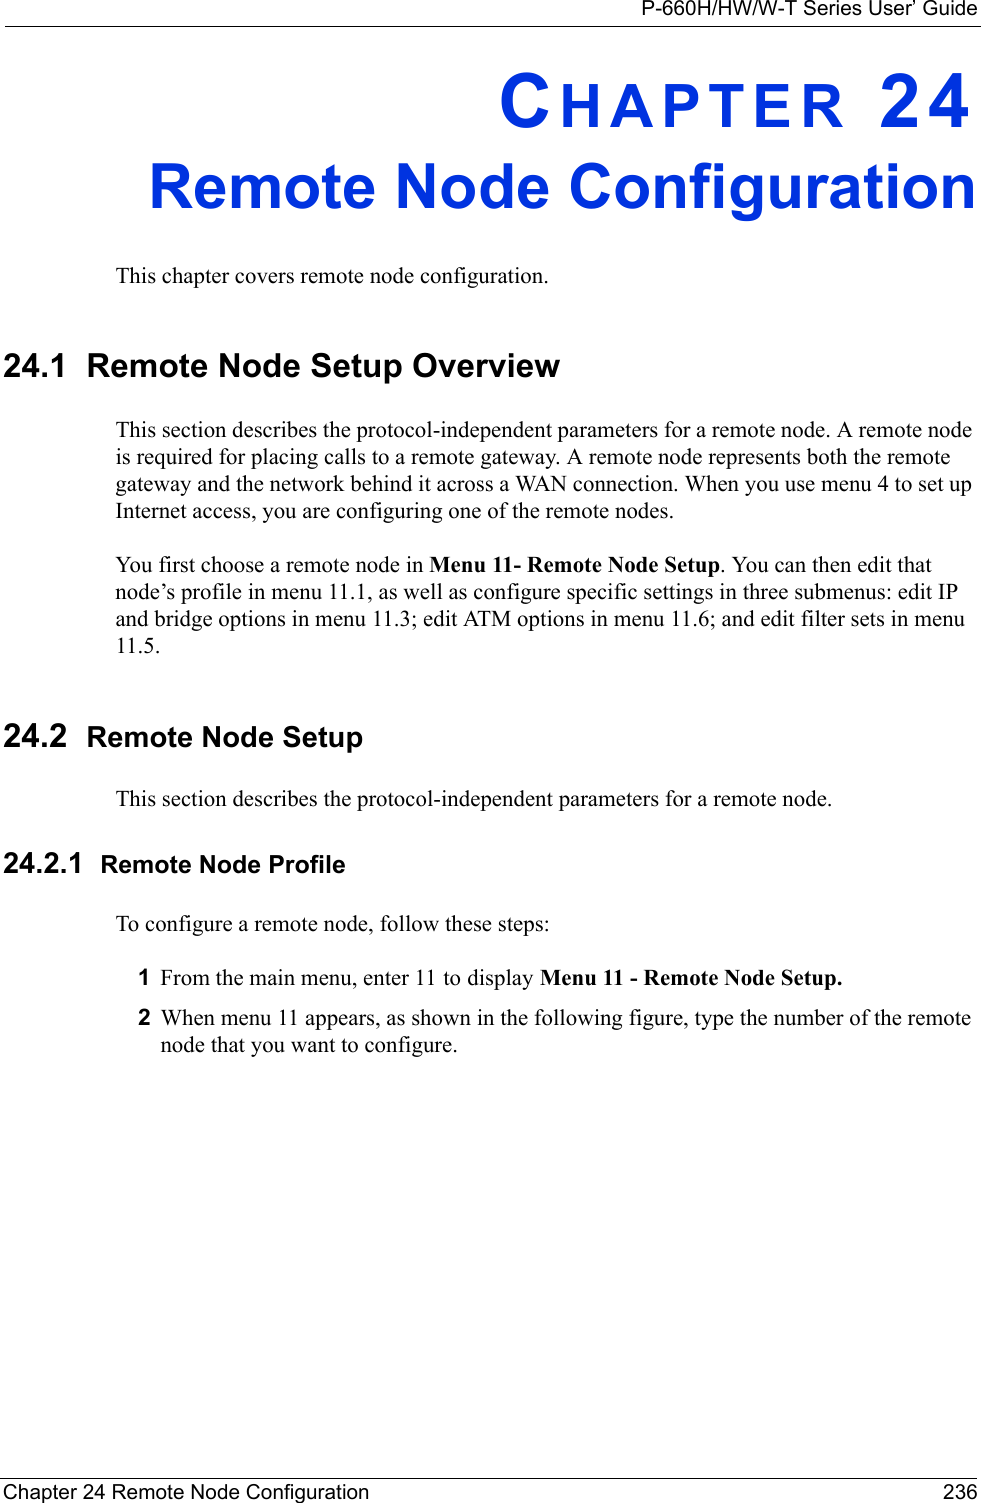 P-660H/HW/W-T Series User’ GuideChapter 24 Remote Node Configuration 236CHAPTER 24Remote Node ConfigurationThis chapter covers remote node configuration.24.1  Remote Node Setup OverviewThis section describes the protocol-independent parameters for a remote node. A remote node is required for placing calls to a remote gateway. A remote node represents both the remote gateway and the network behind it across a WAN connection. When you use menu 4 to set up Internet access, you are configuring one of the remote nodes.You first choose a remote node in Menu 11- Remote Node Setup. You can then edit that node’s profile in menu 11.1, as well as configure specific settings in three submenus: edit IP and bridge options in menu 11.3; edit ATM options in menu 11.6; and edit filter sets in menu 11.5.24.2  Remote Node SetupThis section describes the protocol-independent parameters for a remote node.24.2.1  Remote Node ProfileTo configure a remote node, follow these steps:1From the main menu, enter 11 to display Menu 11 - Remote Node Setup.2When menu 11 appears, as shown in the following figure, type the number of the remote node that you want to configure.